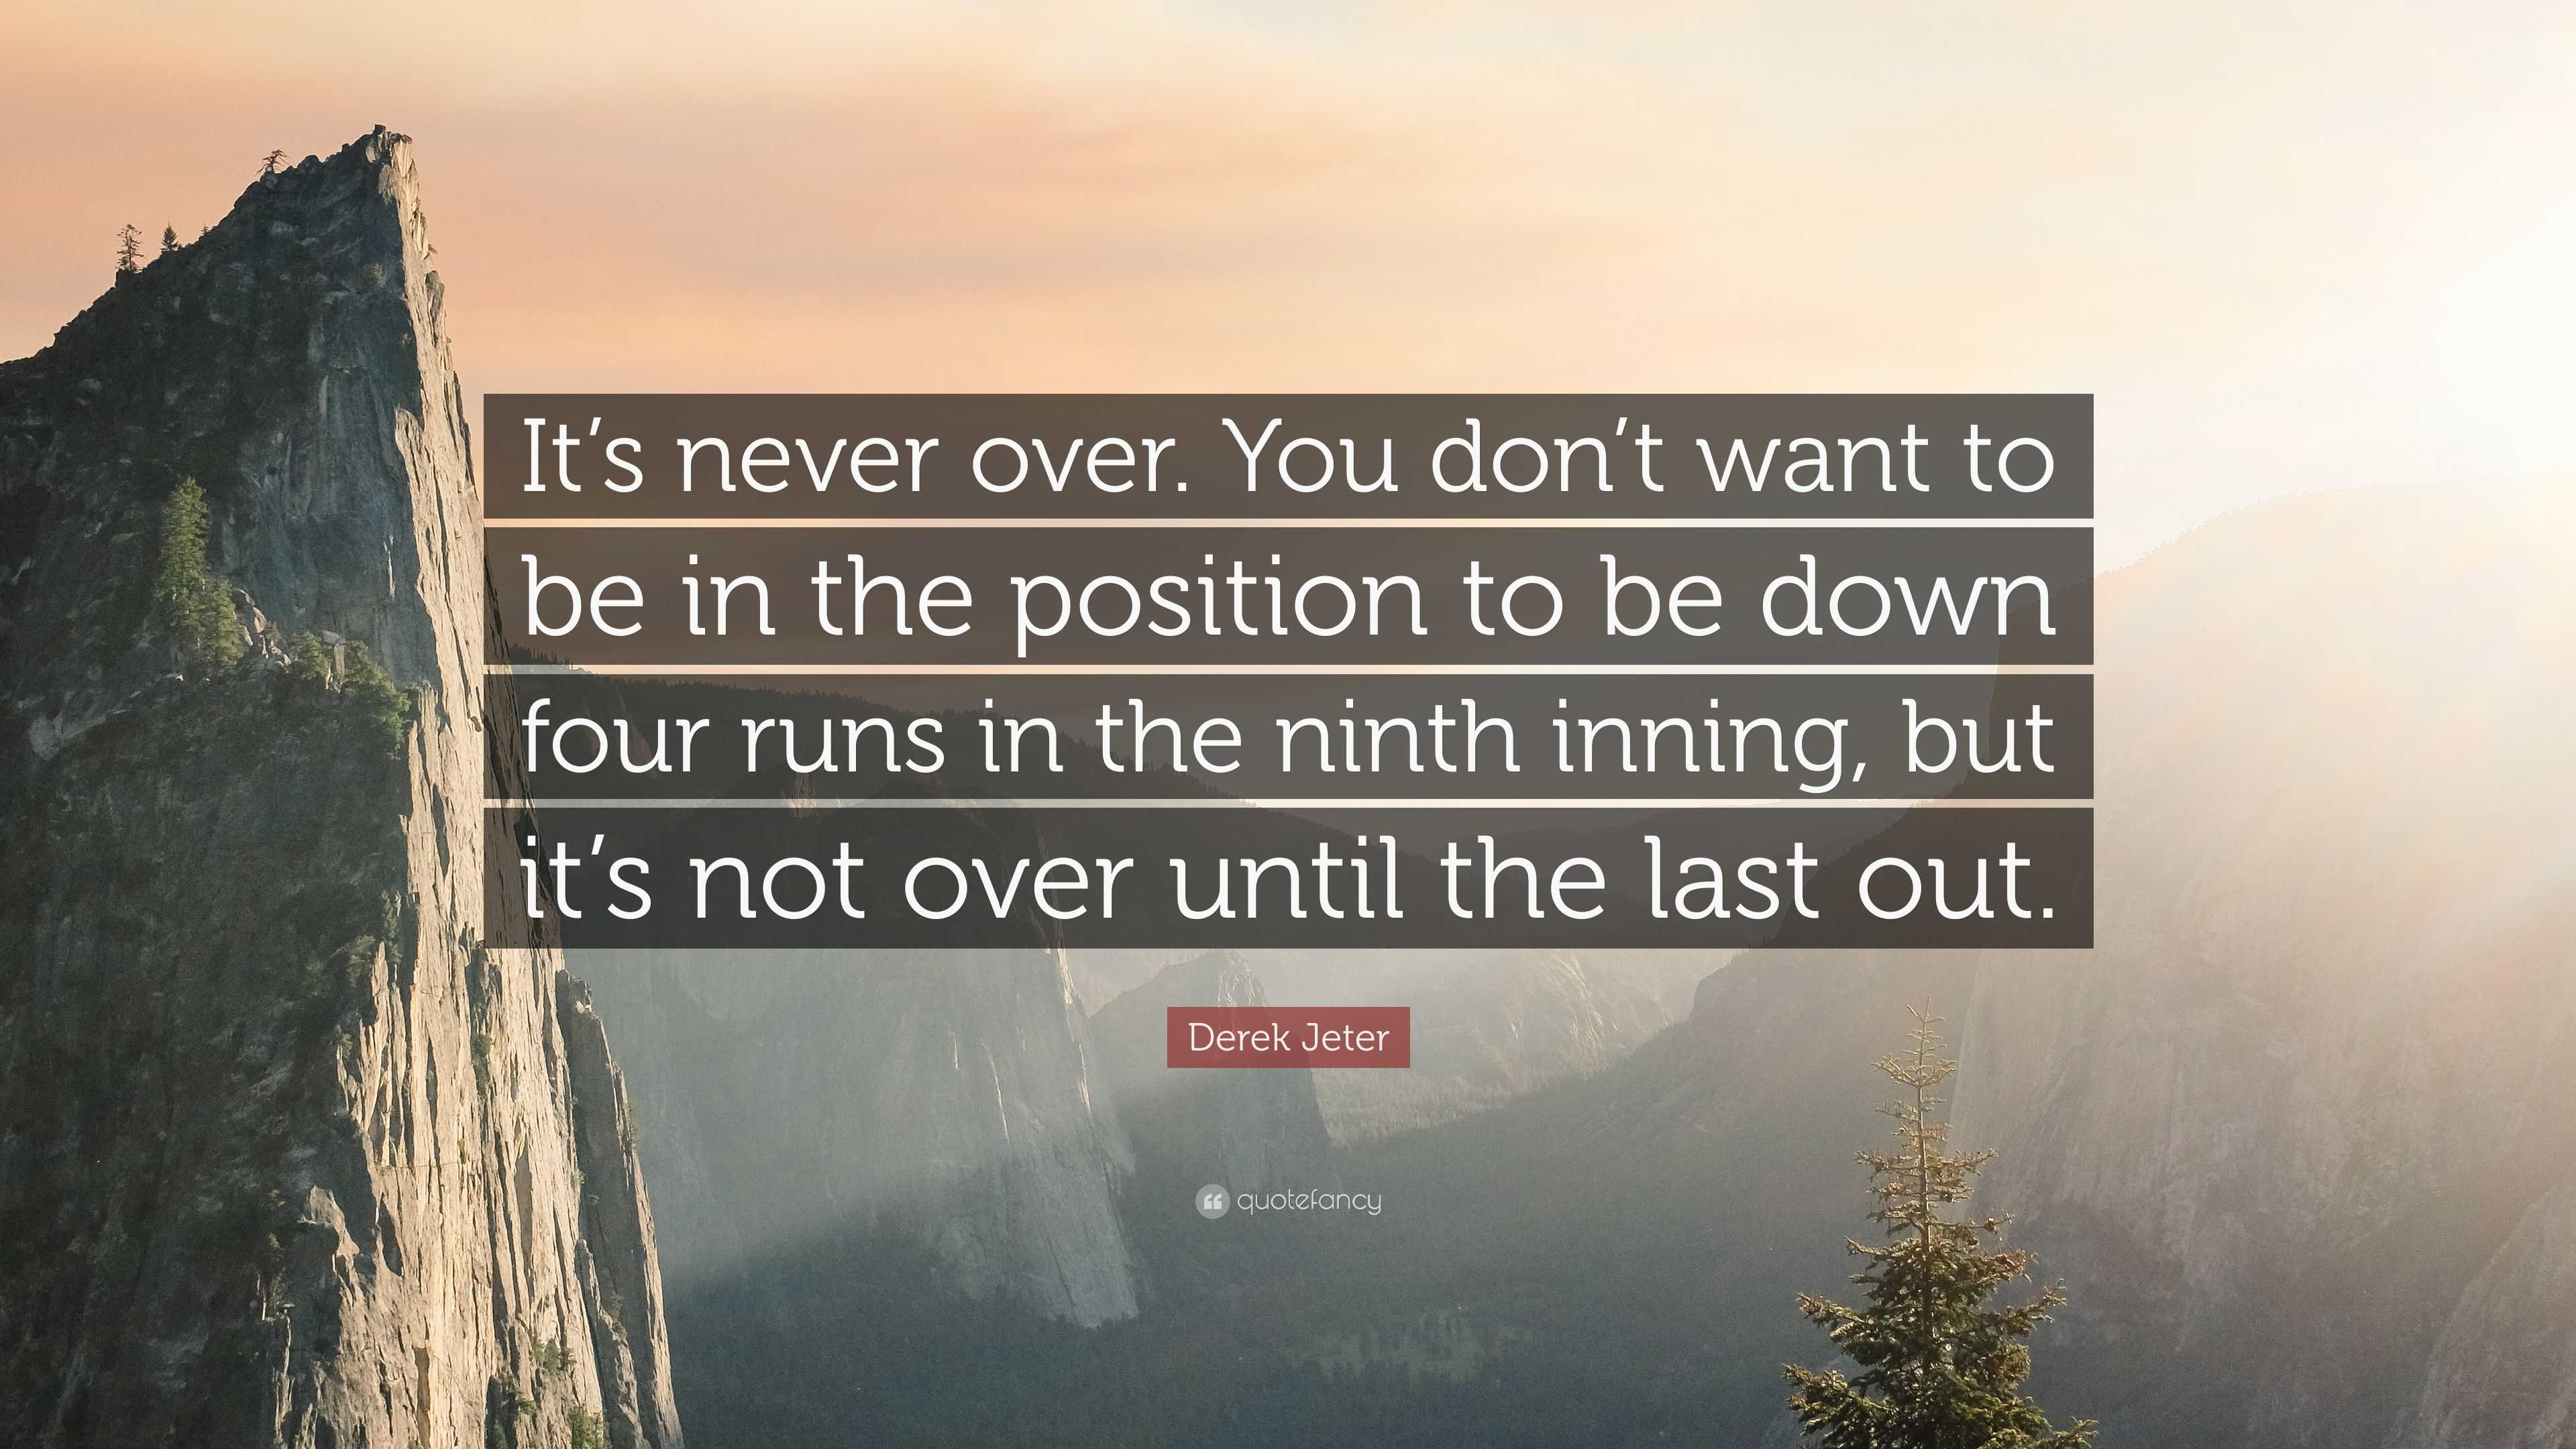 3421078 Derek Jeter Quote It s never over You don t want to be in the